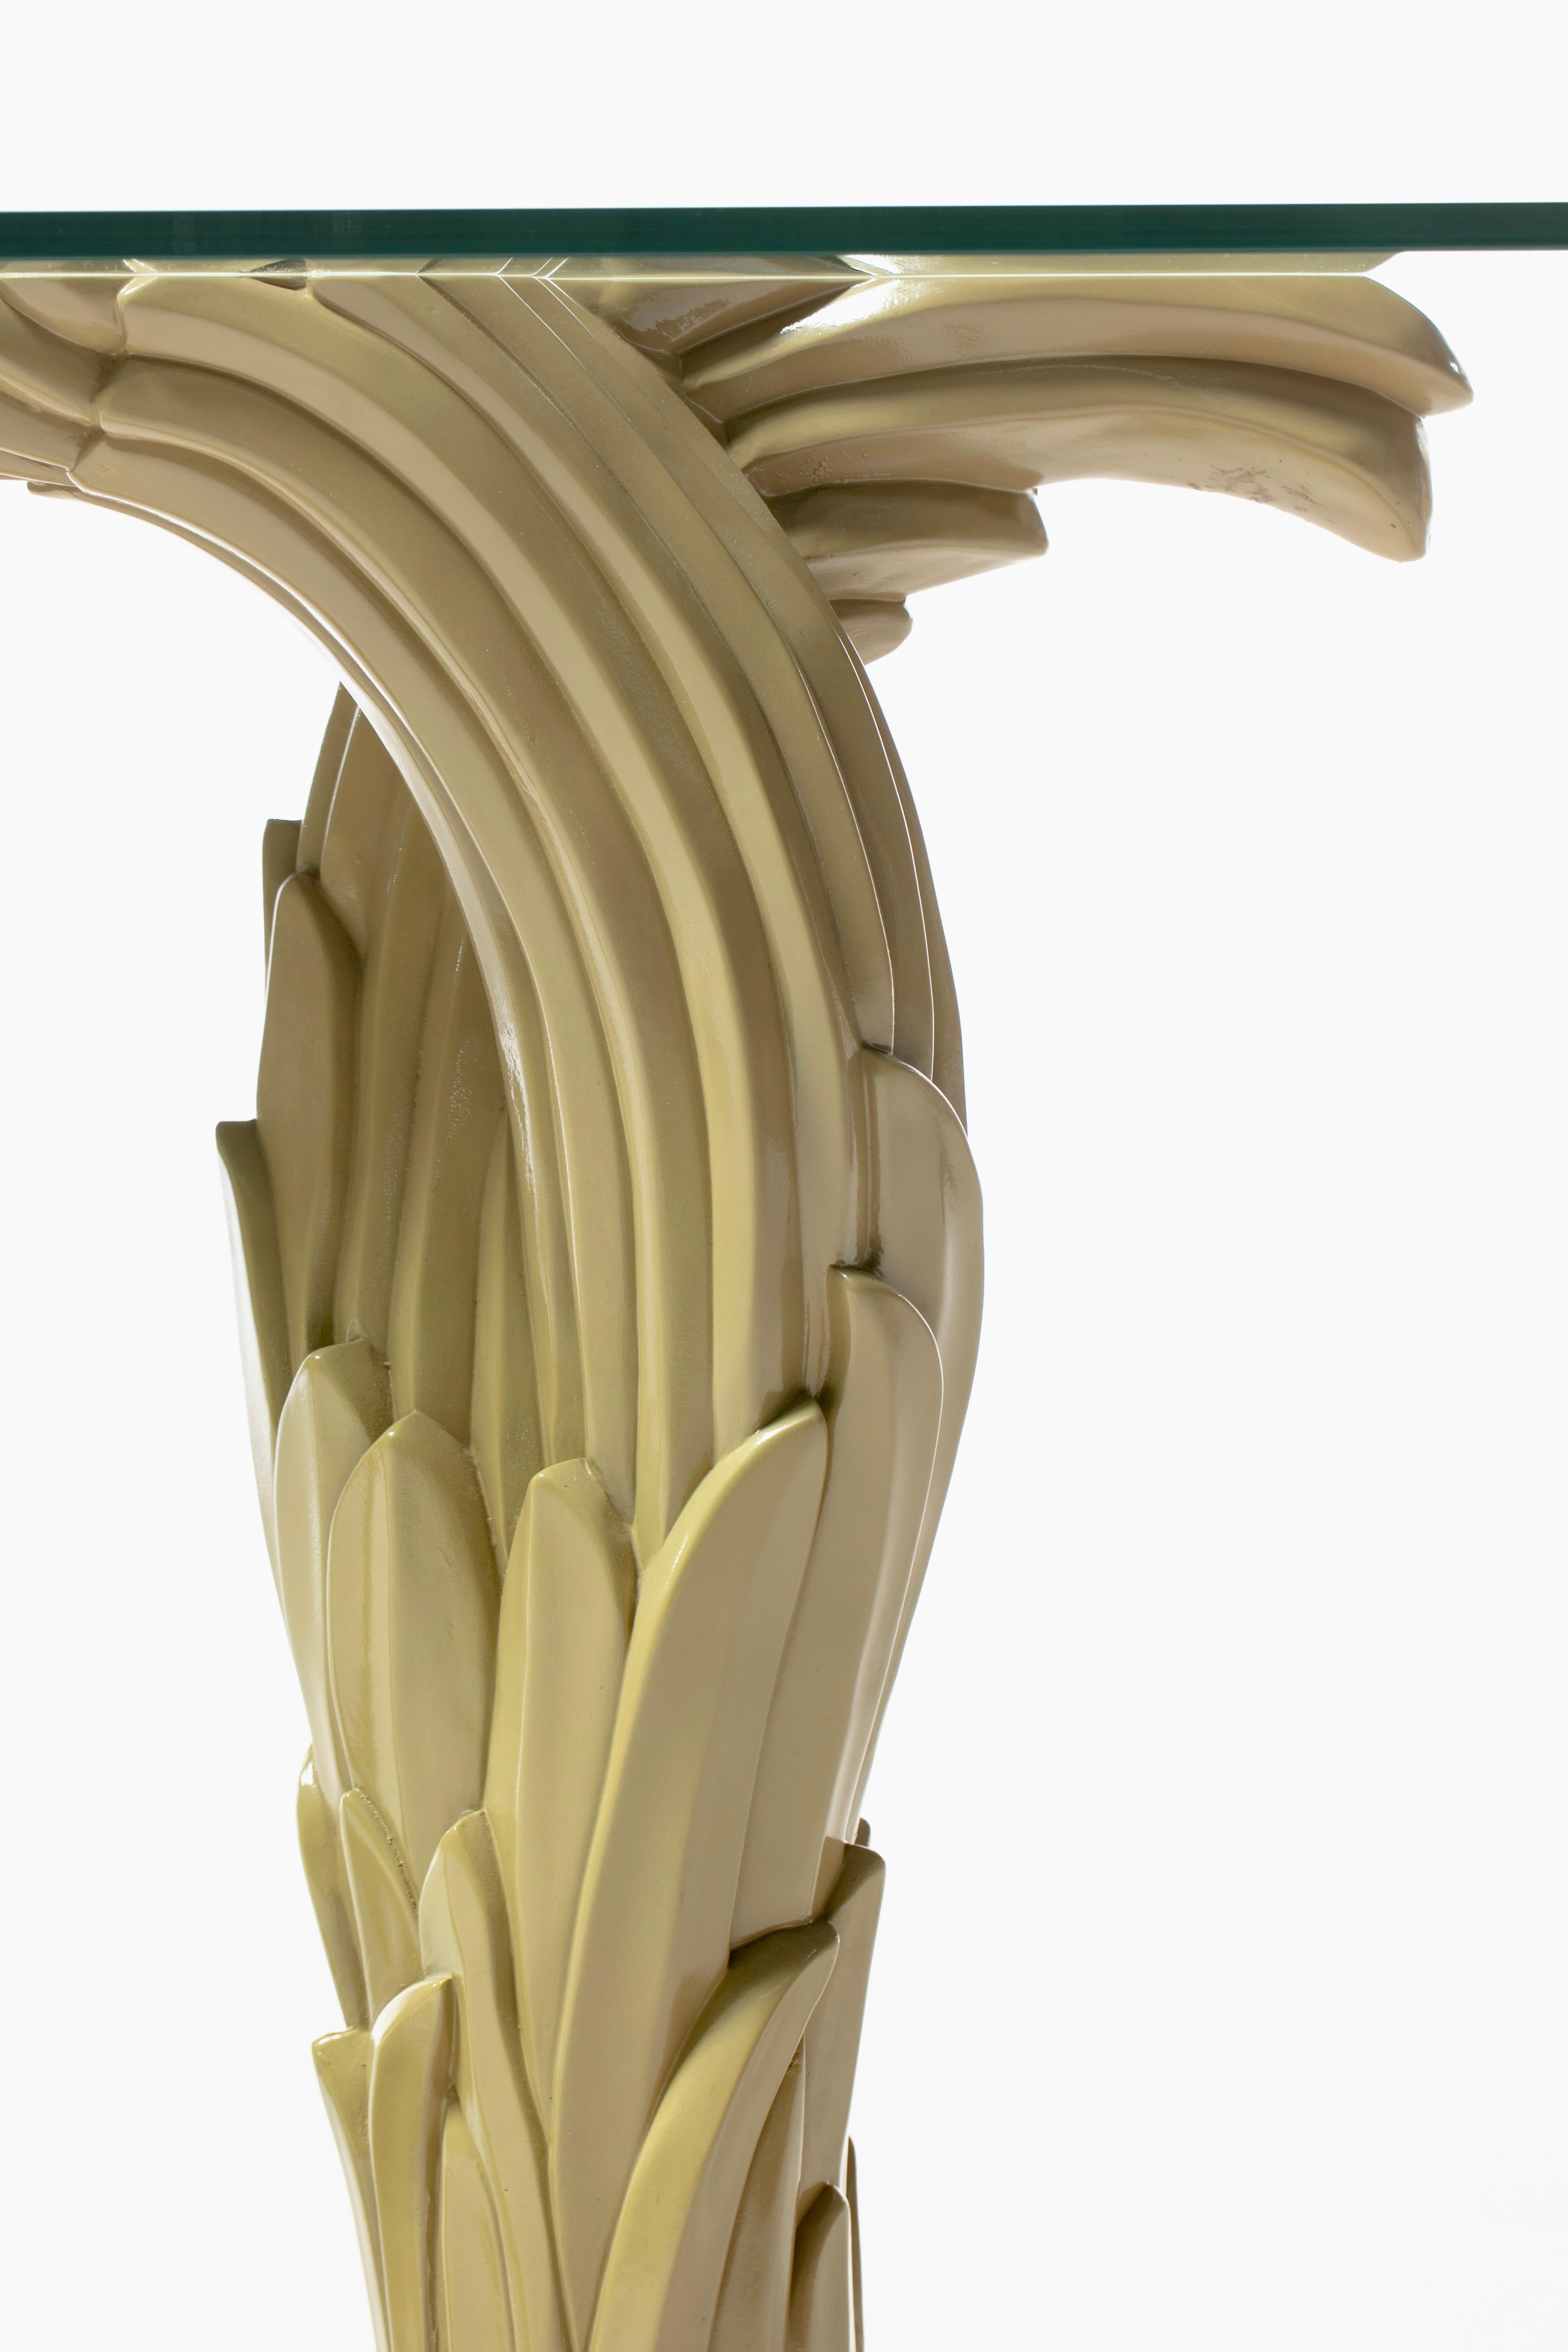 Art Deco Serge Roche Style Palm Leaf Console Lacquered in Almond Latte c. 1980 For Sale 5